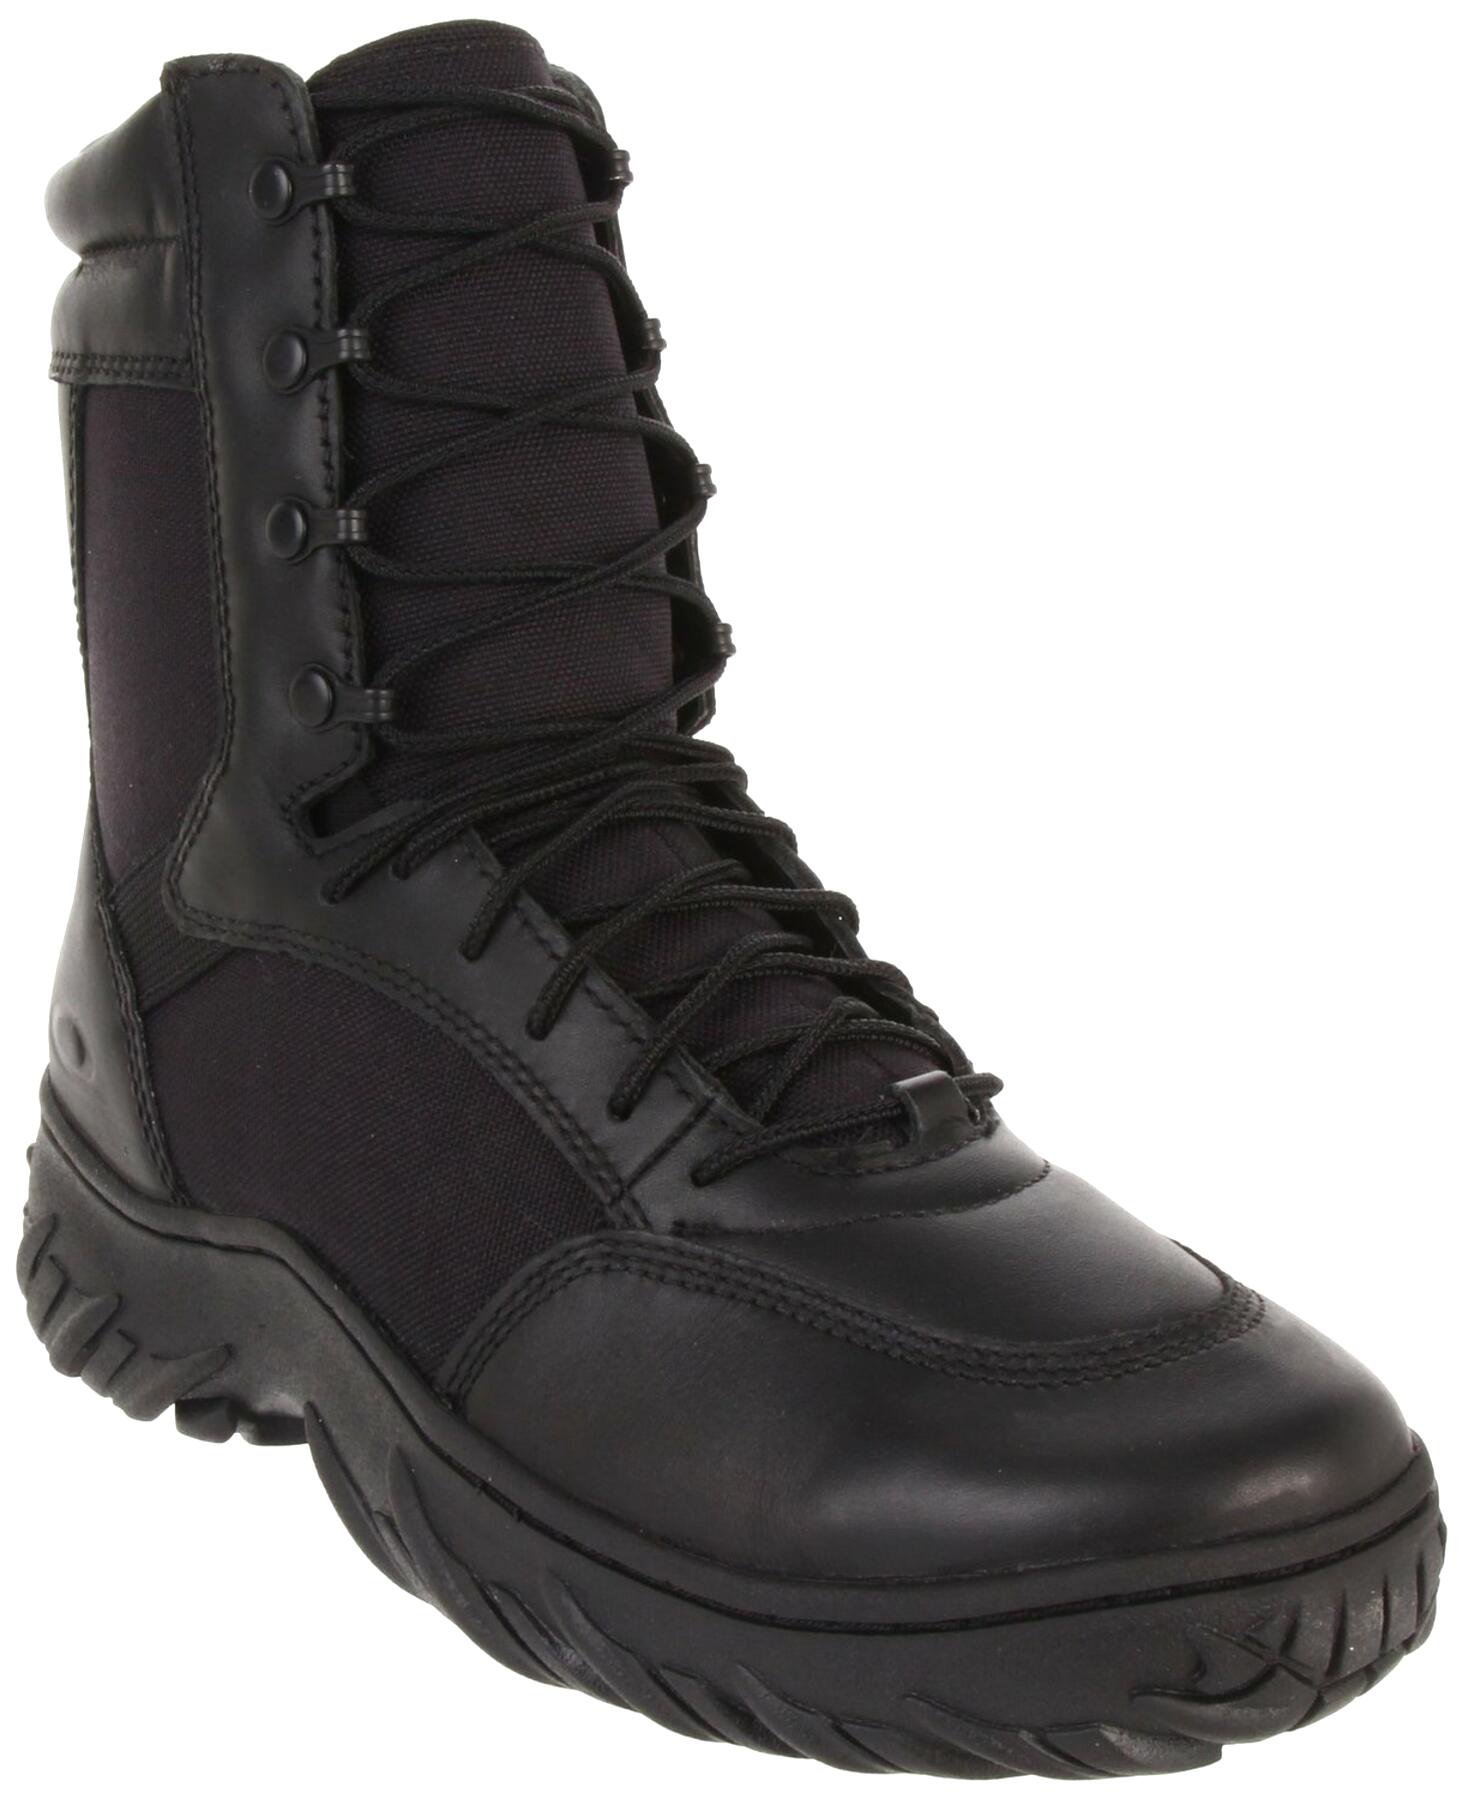 Oakley Boots for sale in UK | 56 used Oakley Boots